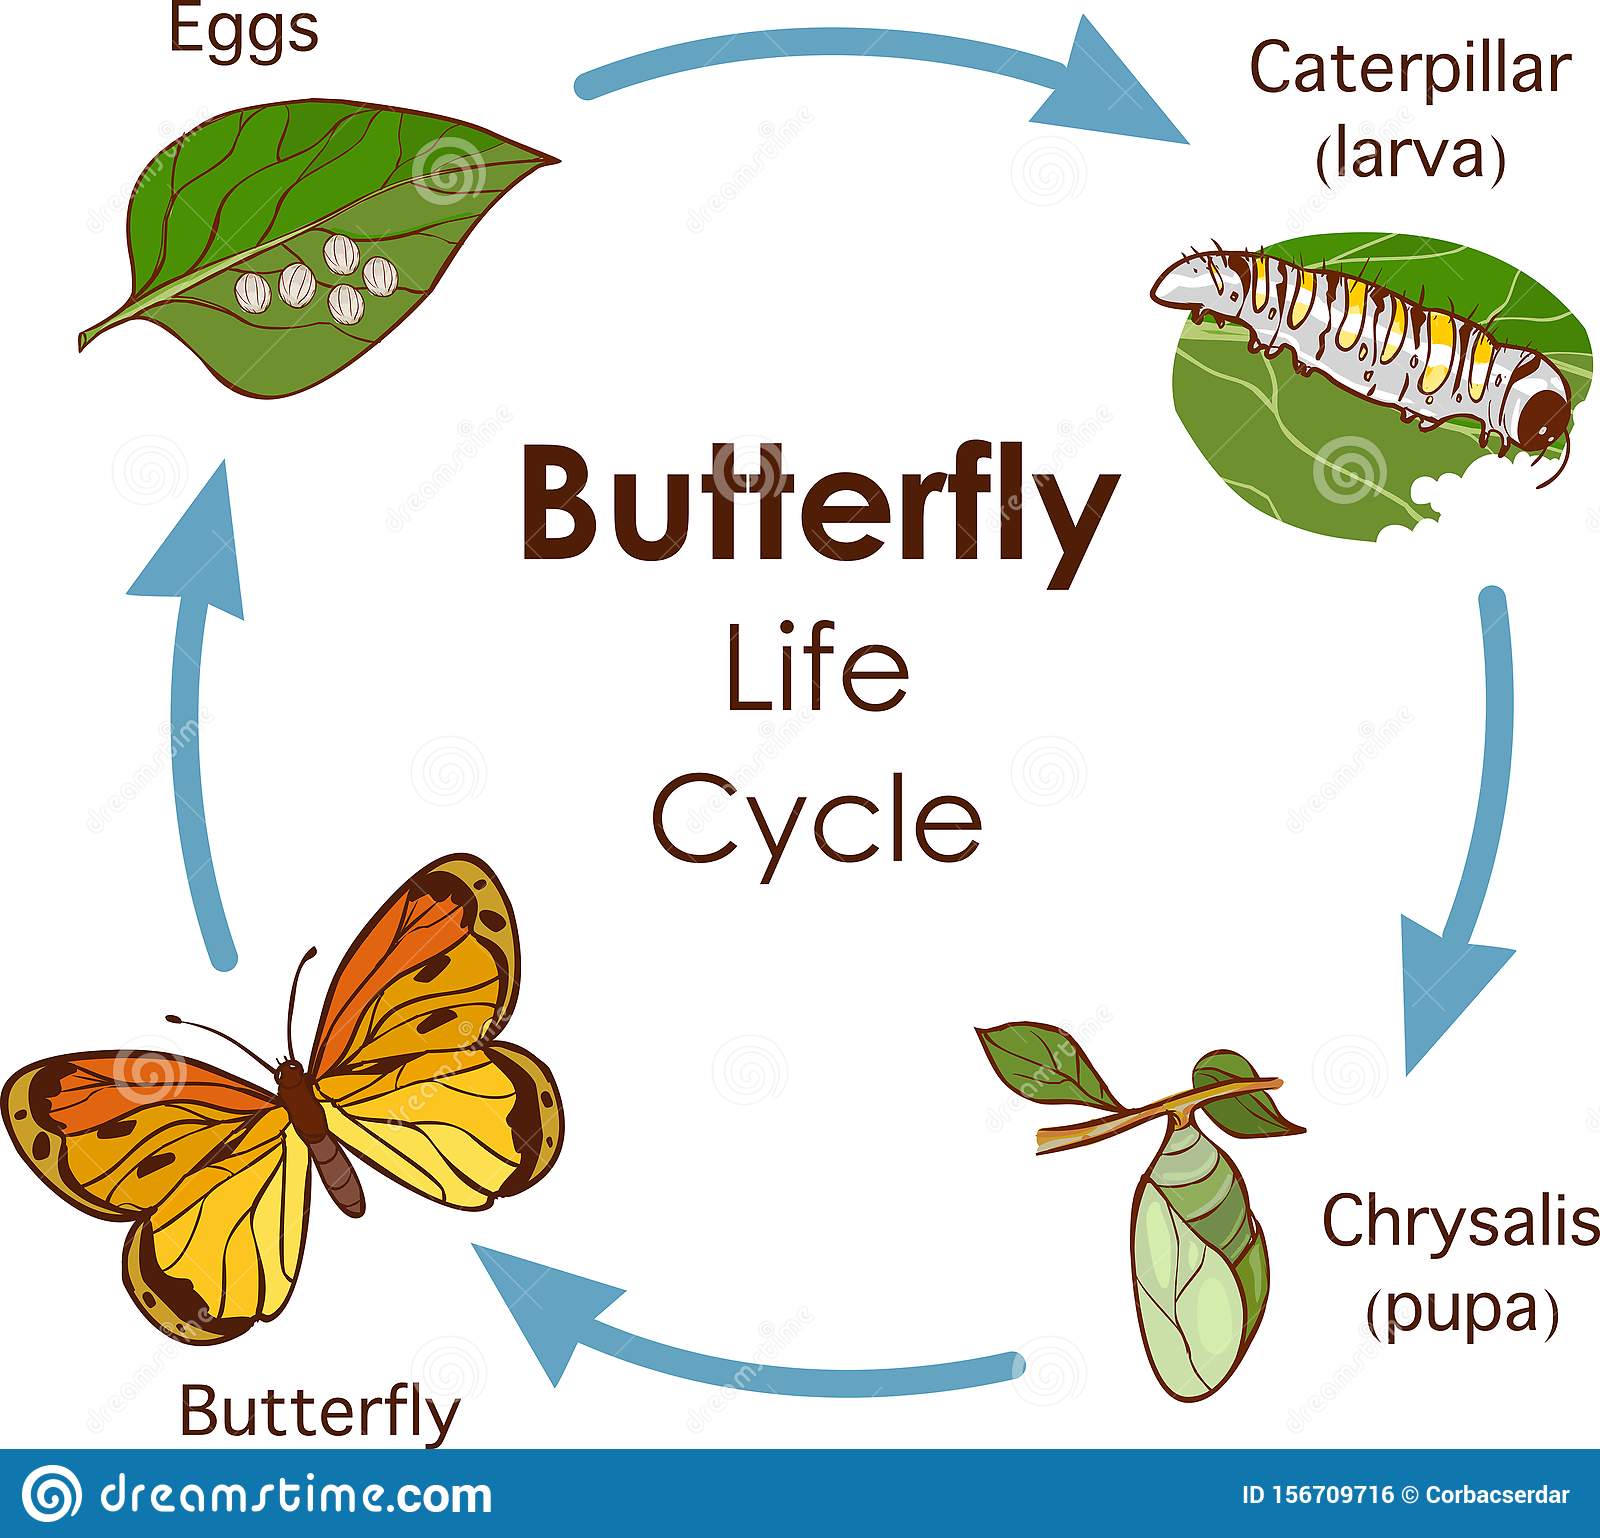 chart-the-butterfly-life-cycle-nuria-store